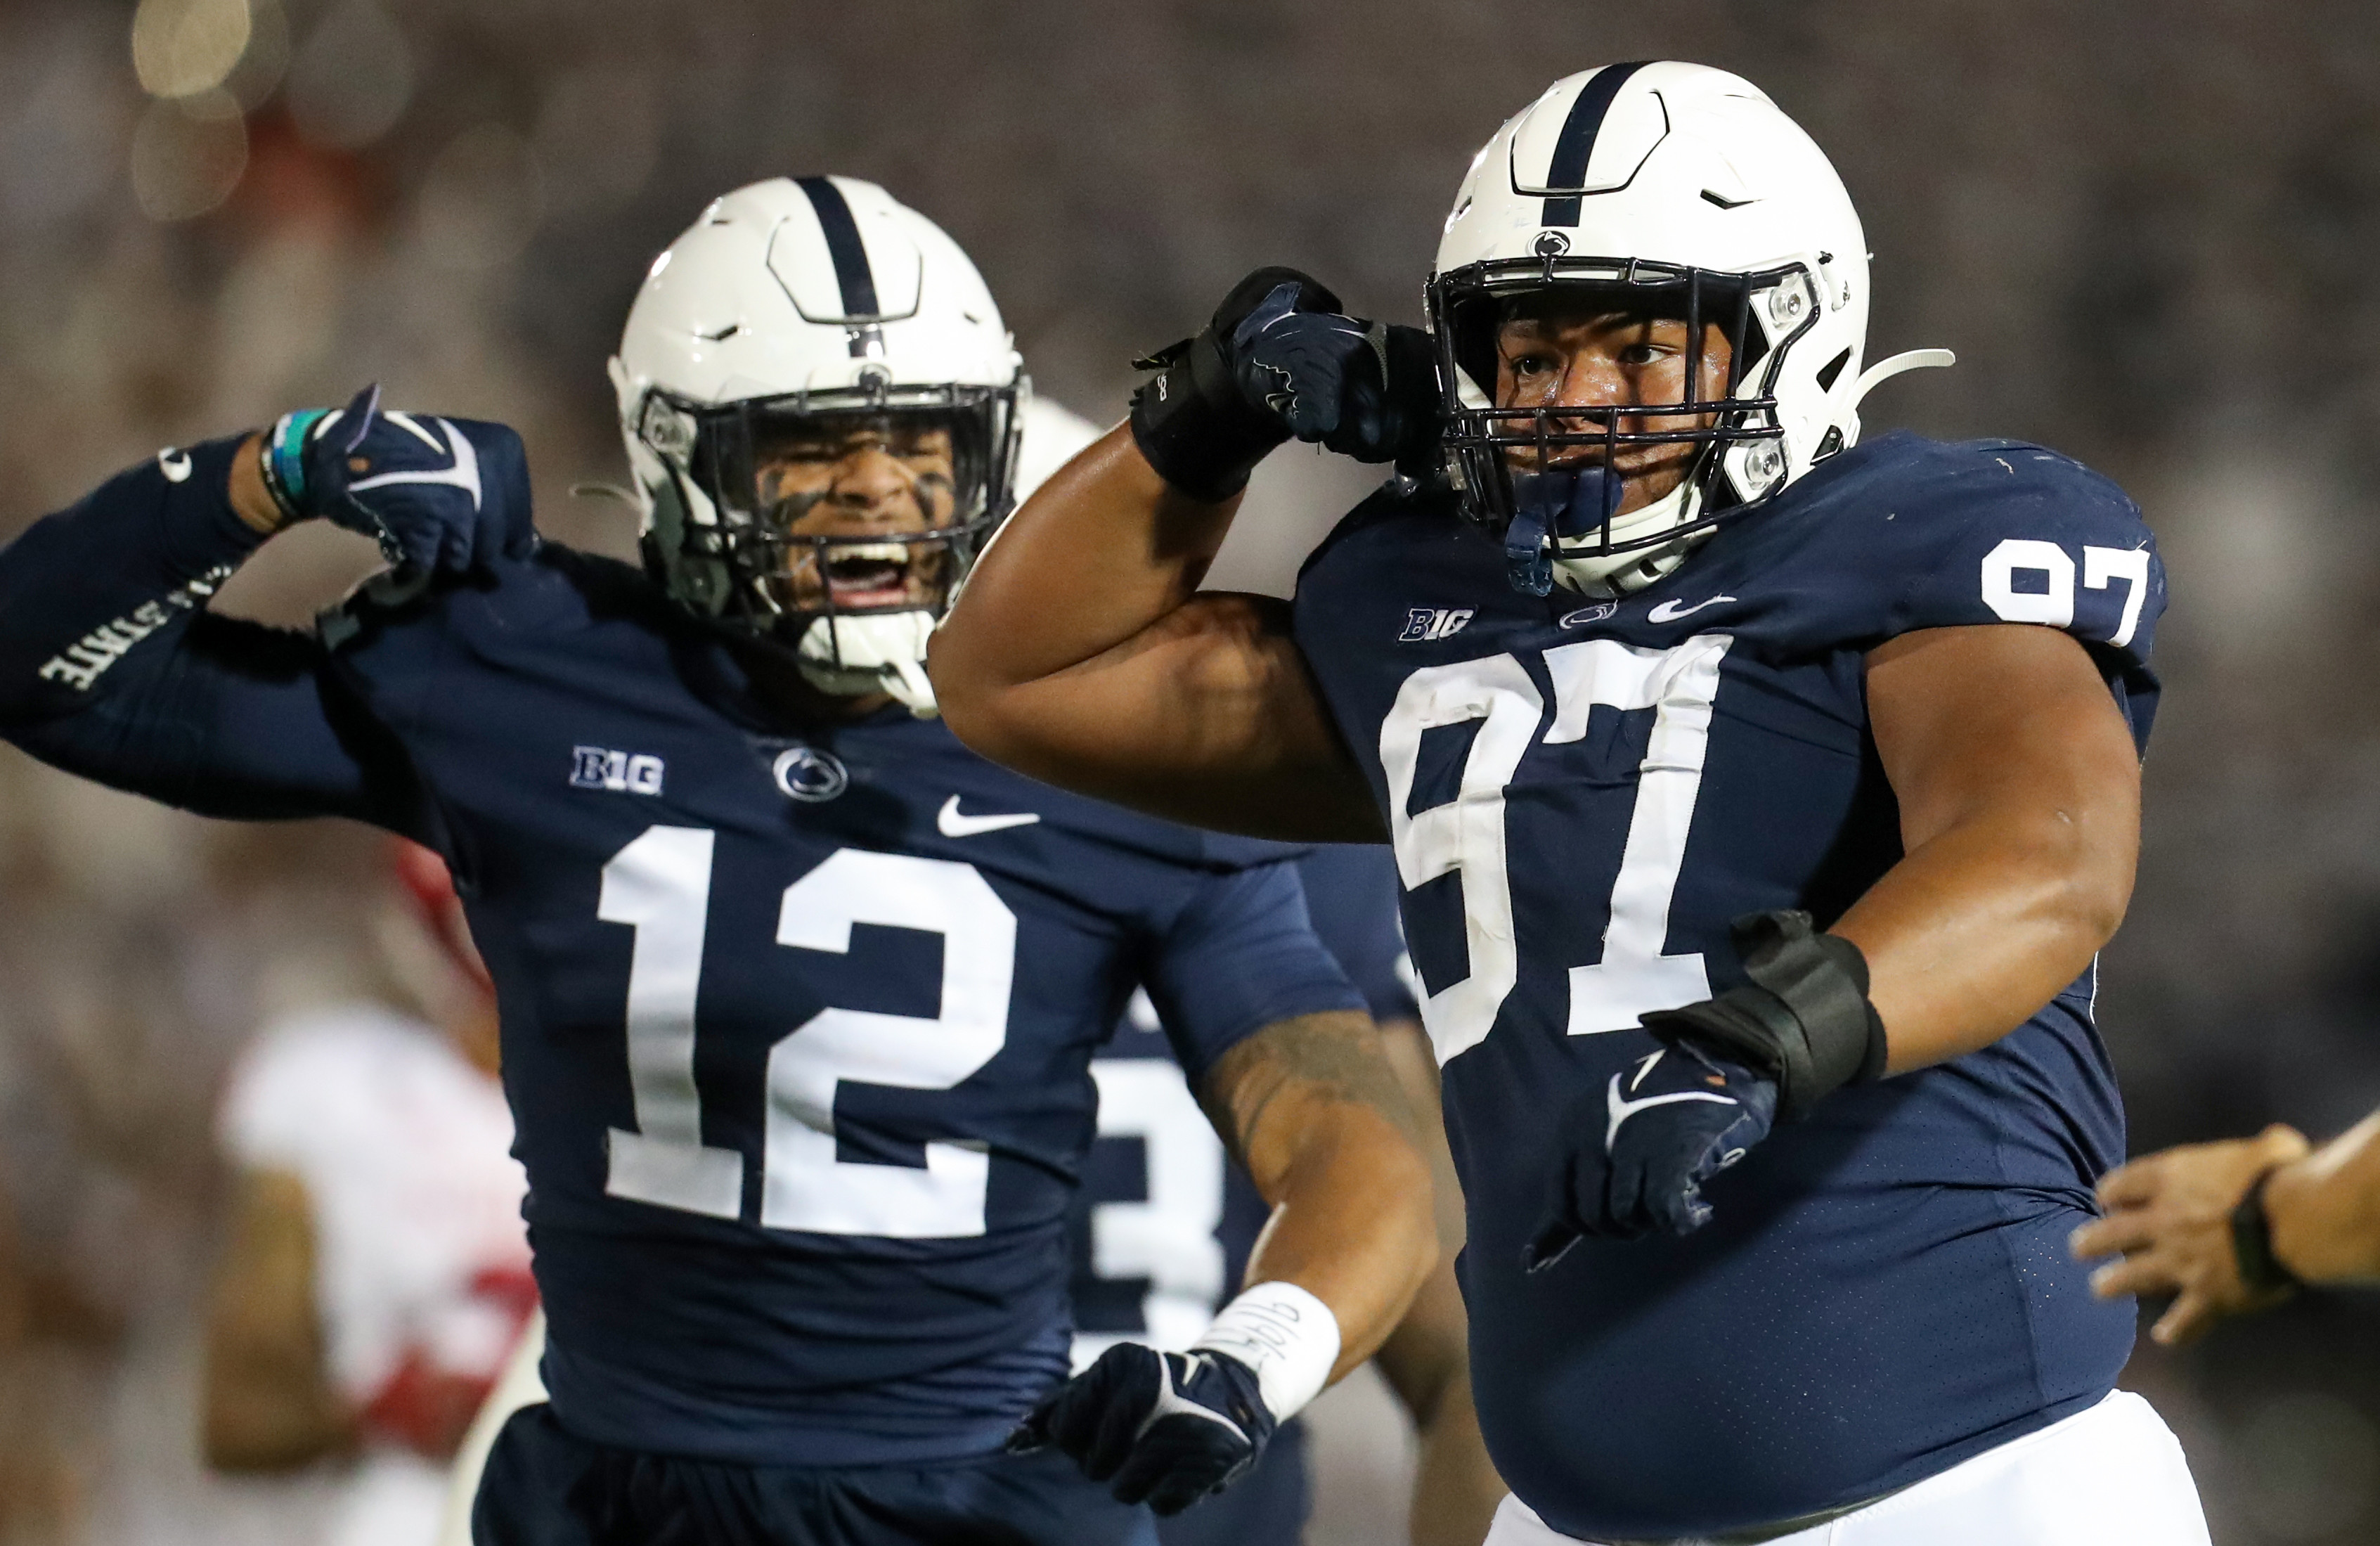 Penn State Defeats Indiana 240, Setting up an Anticipated Defensive